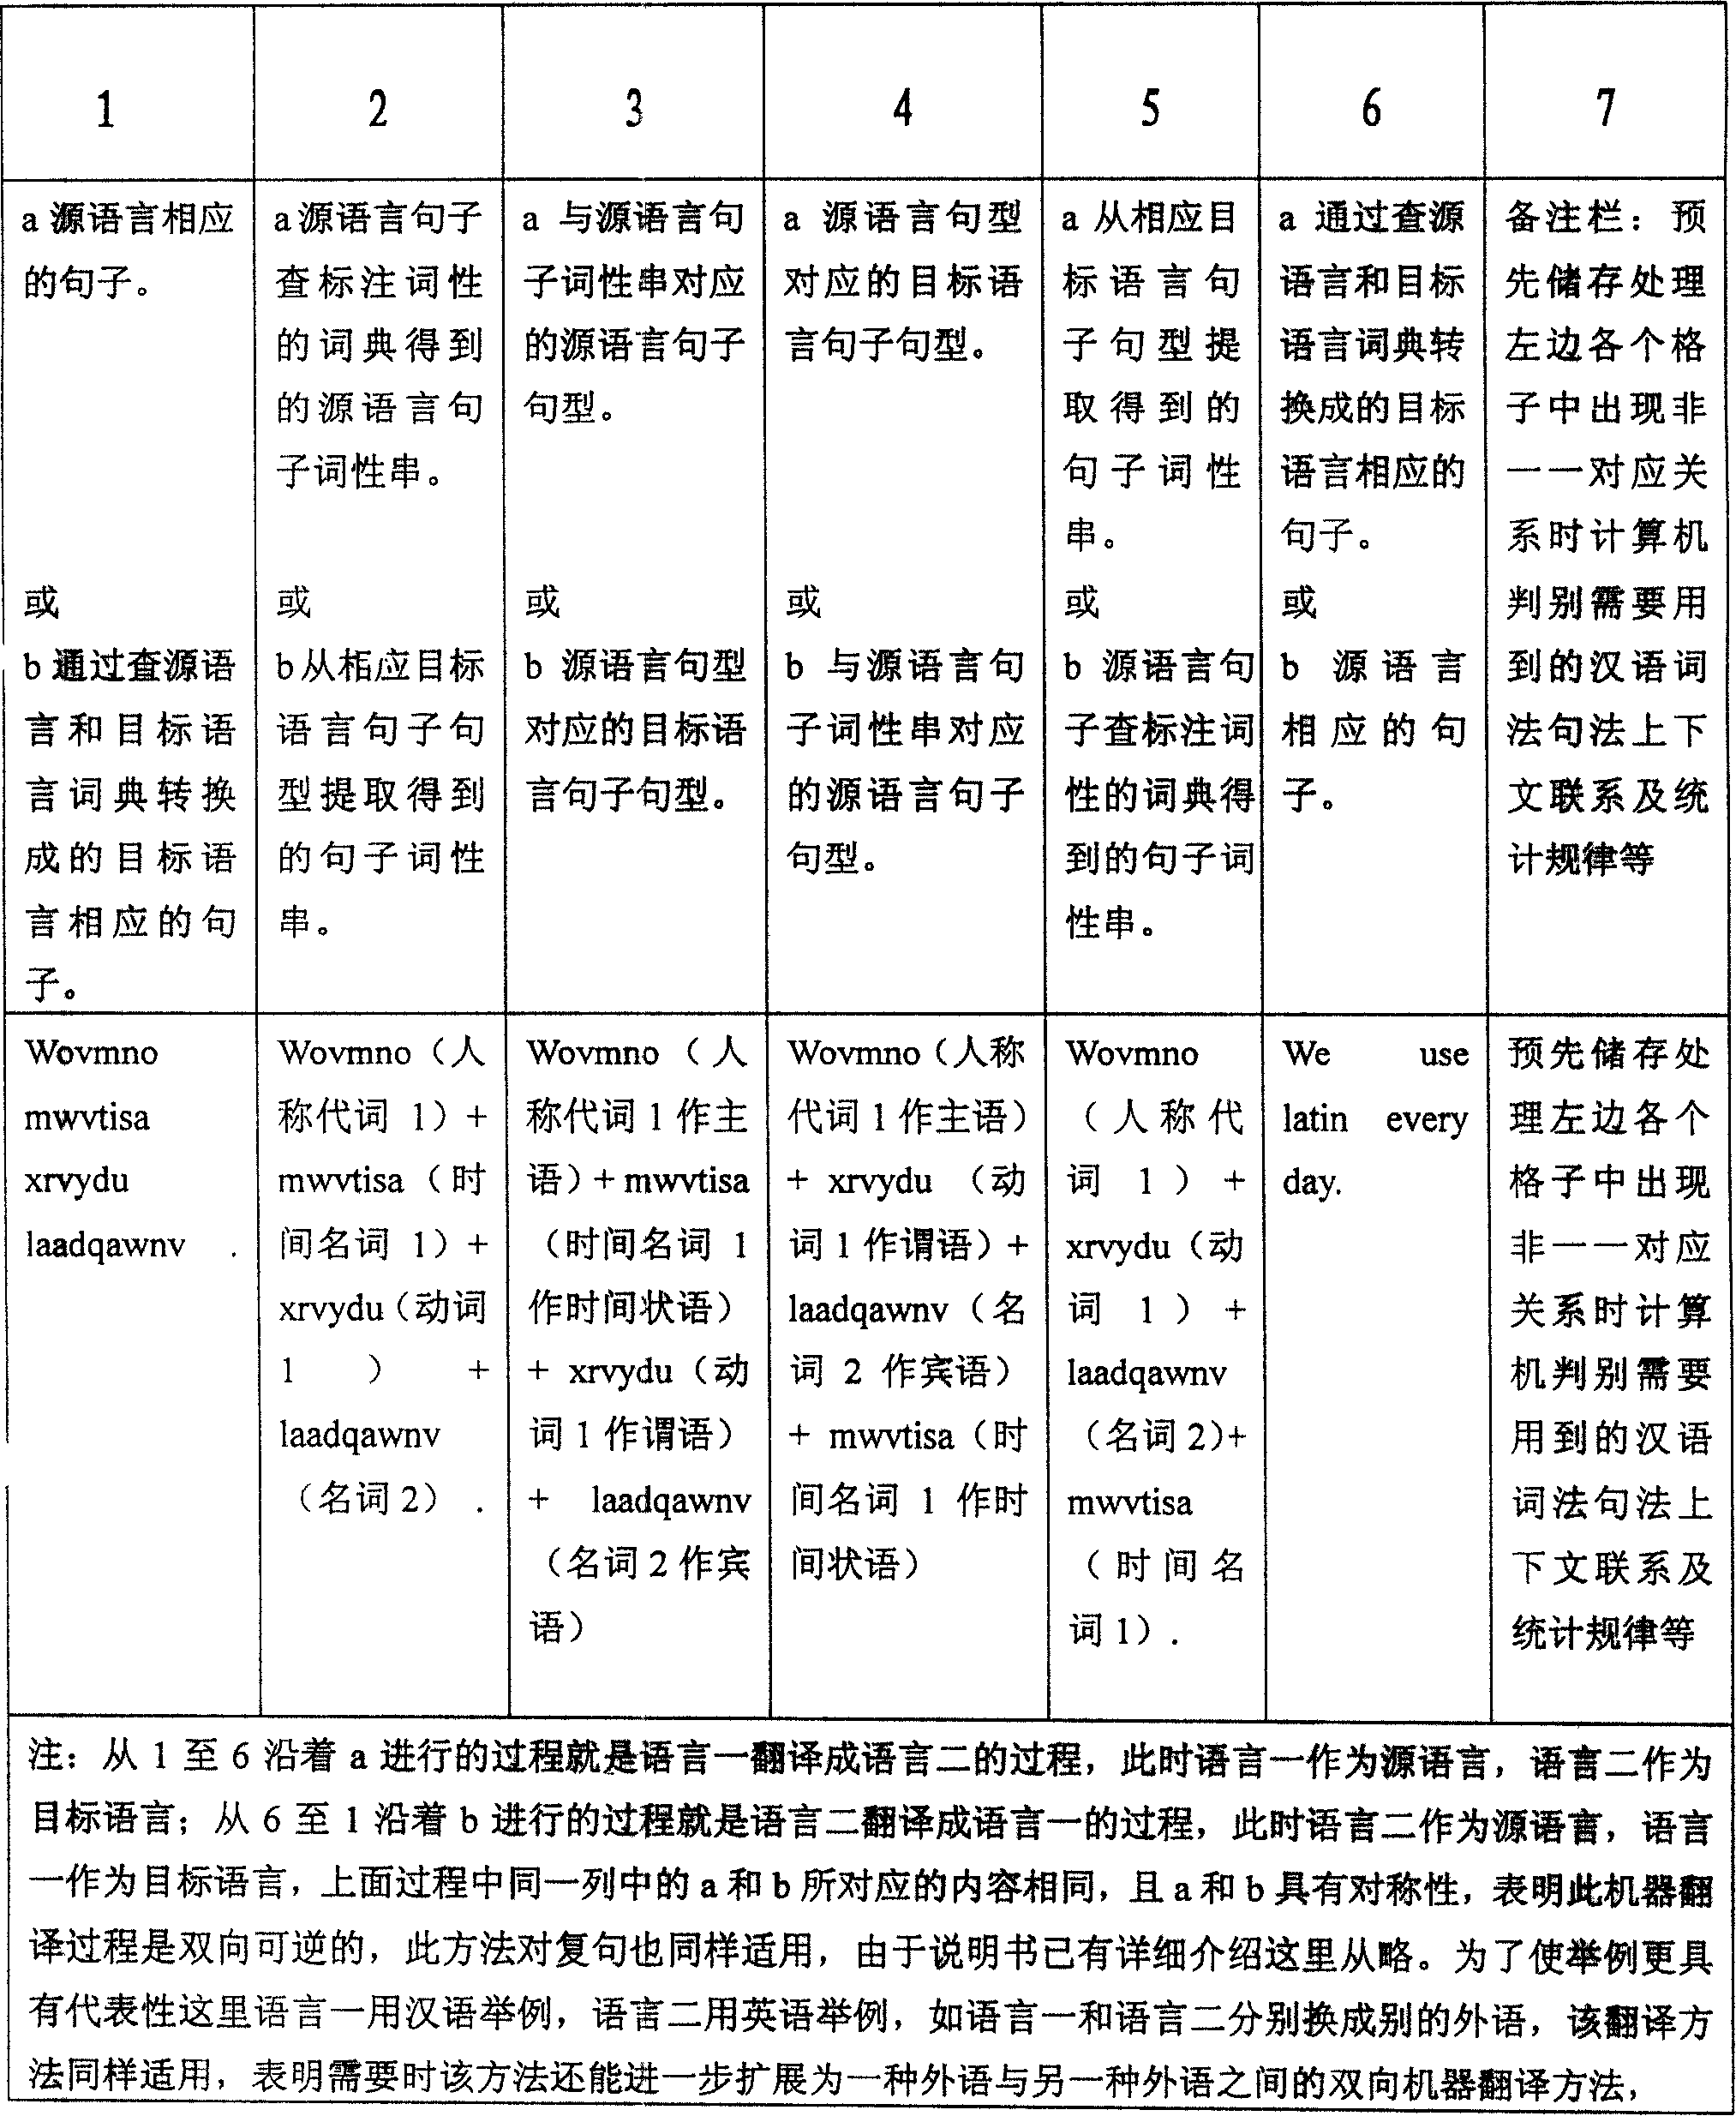 Bidirectional mechanical translation method for sentence pattern conversion between Chinese language and foreign language